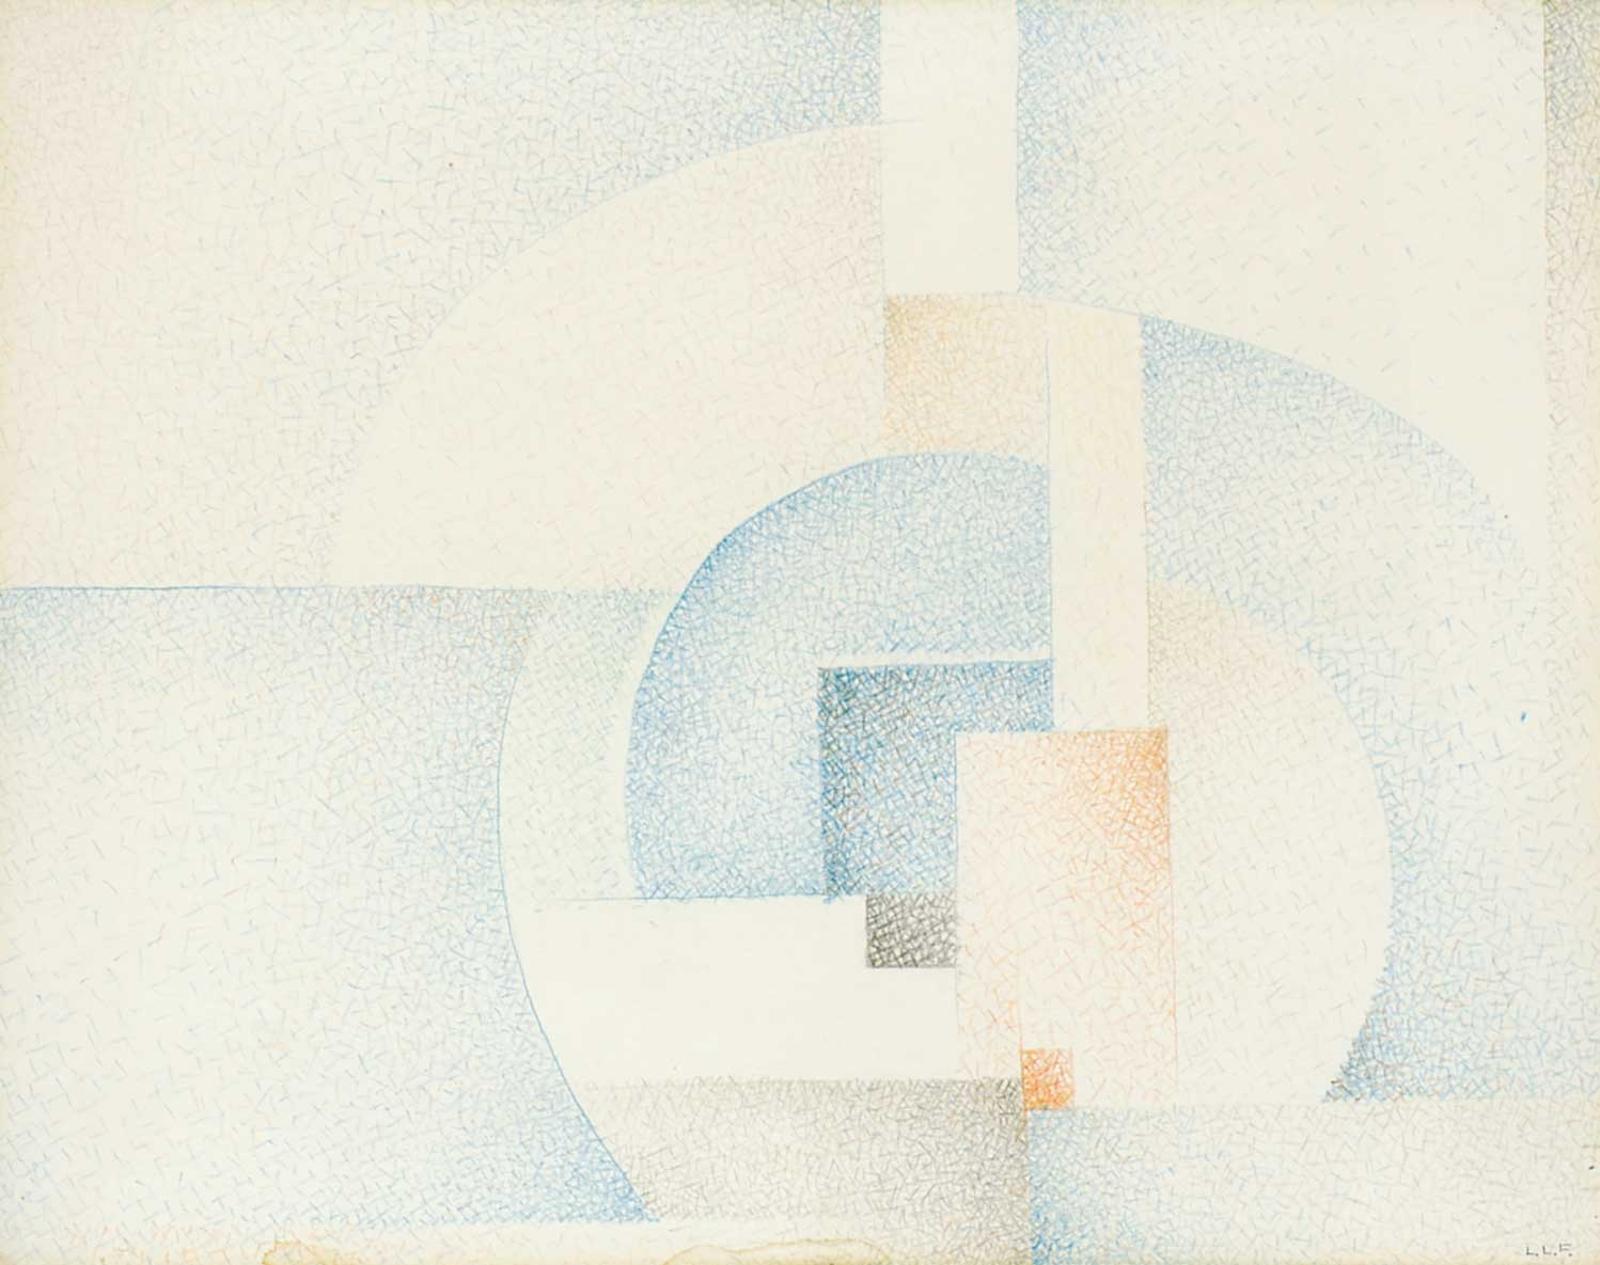 Lionel Lemoine FitzGerald (1890-1956) - Abstract